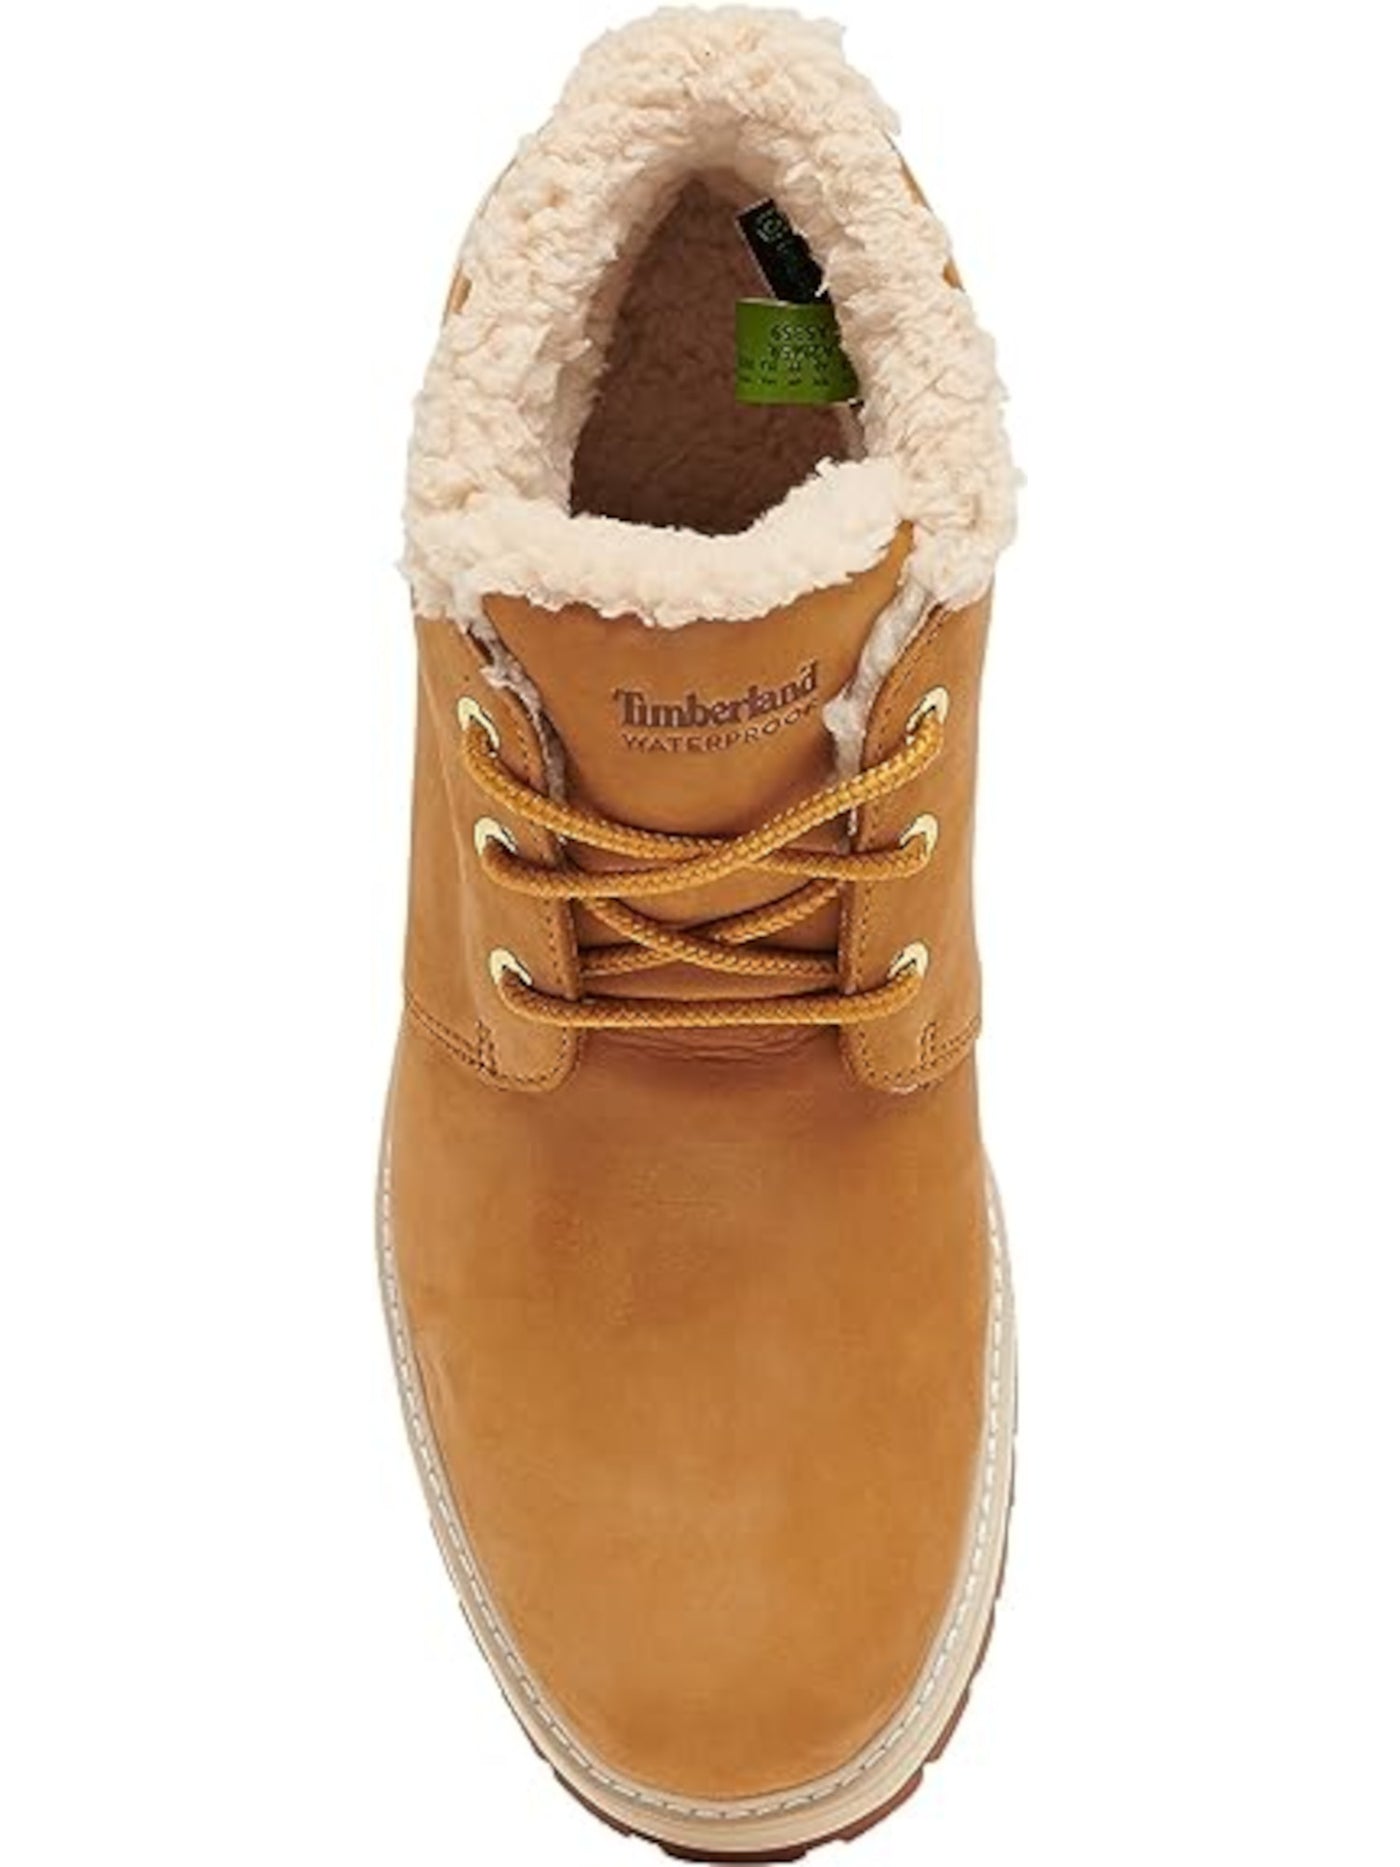 TIMBERLAND Mens Beige Water Resistant Lug Sole Richmond Ridge Round Toe Wedge Lace-Up Leather Chukka Boots 10.5 M